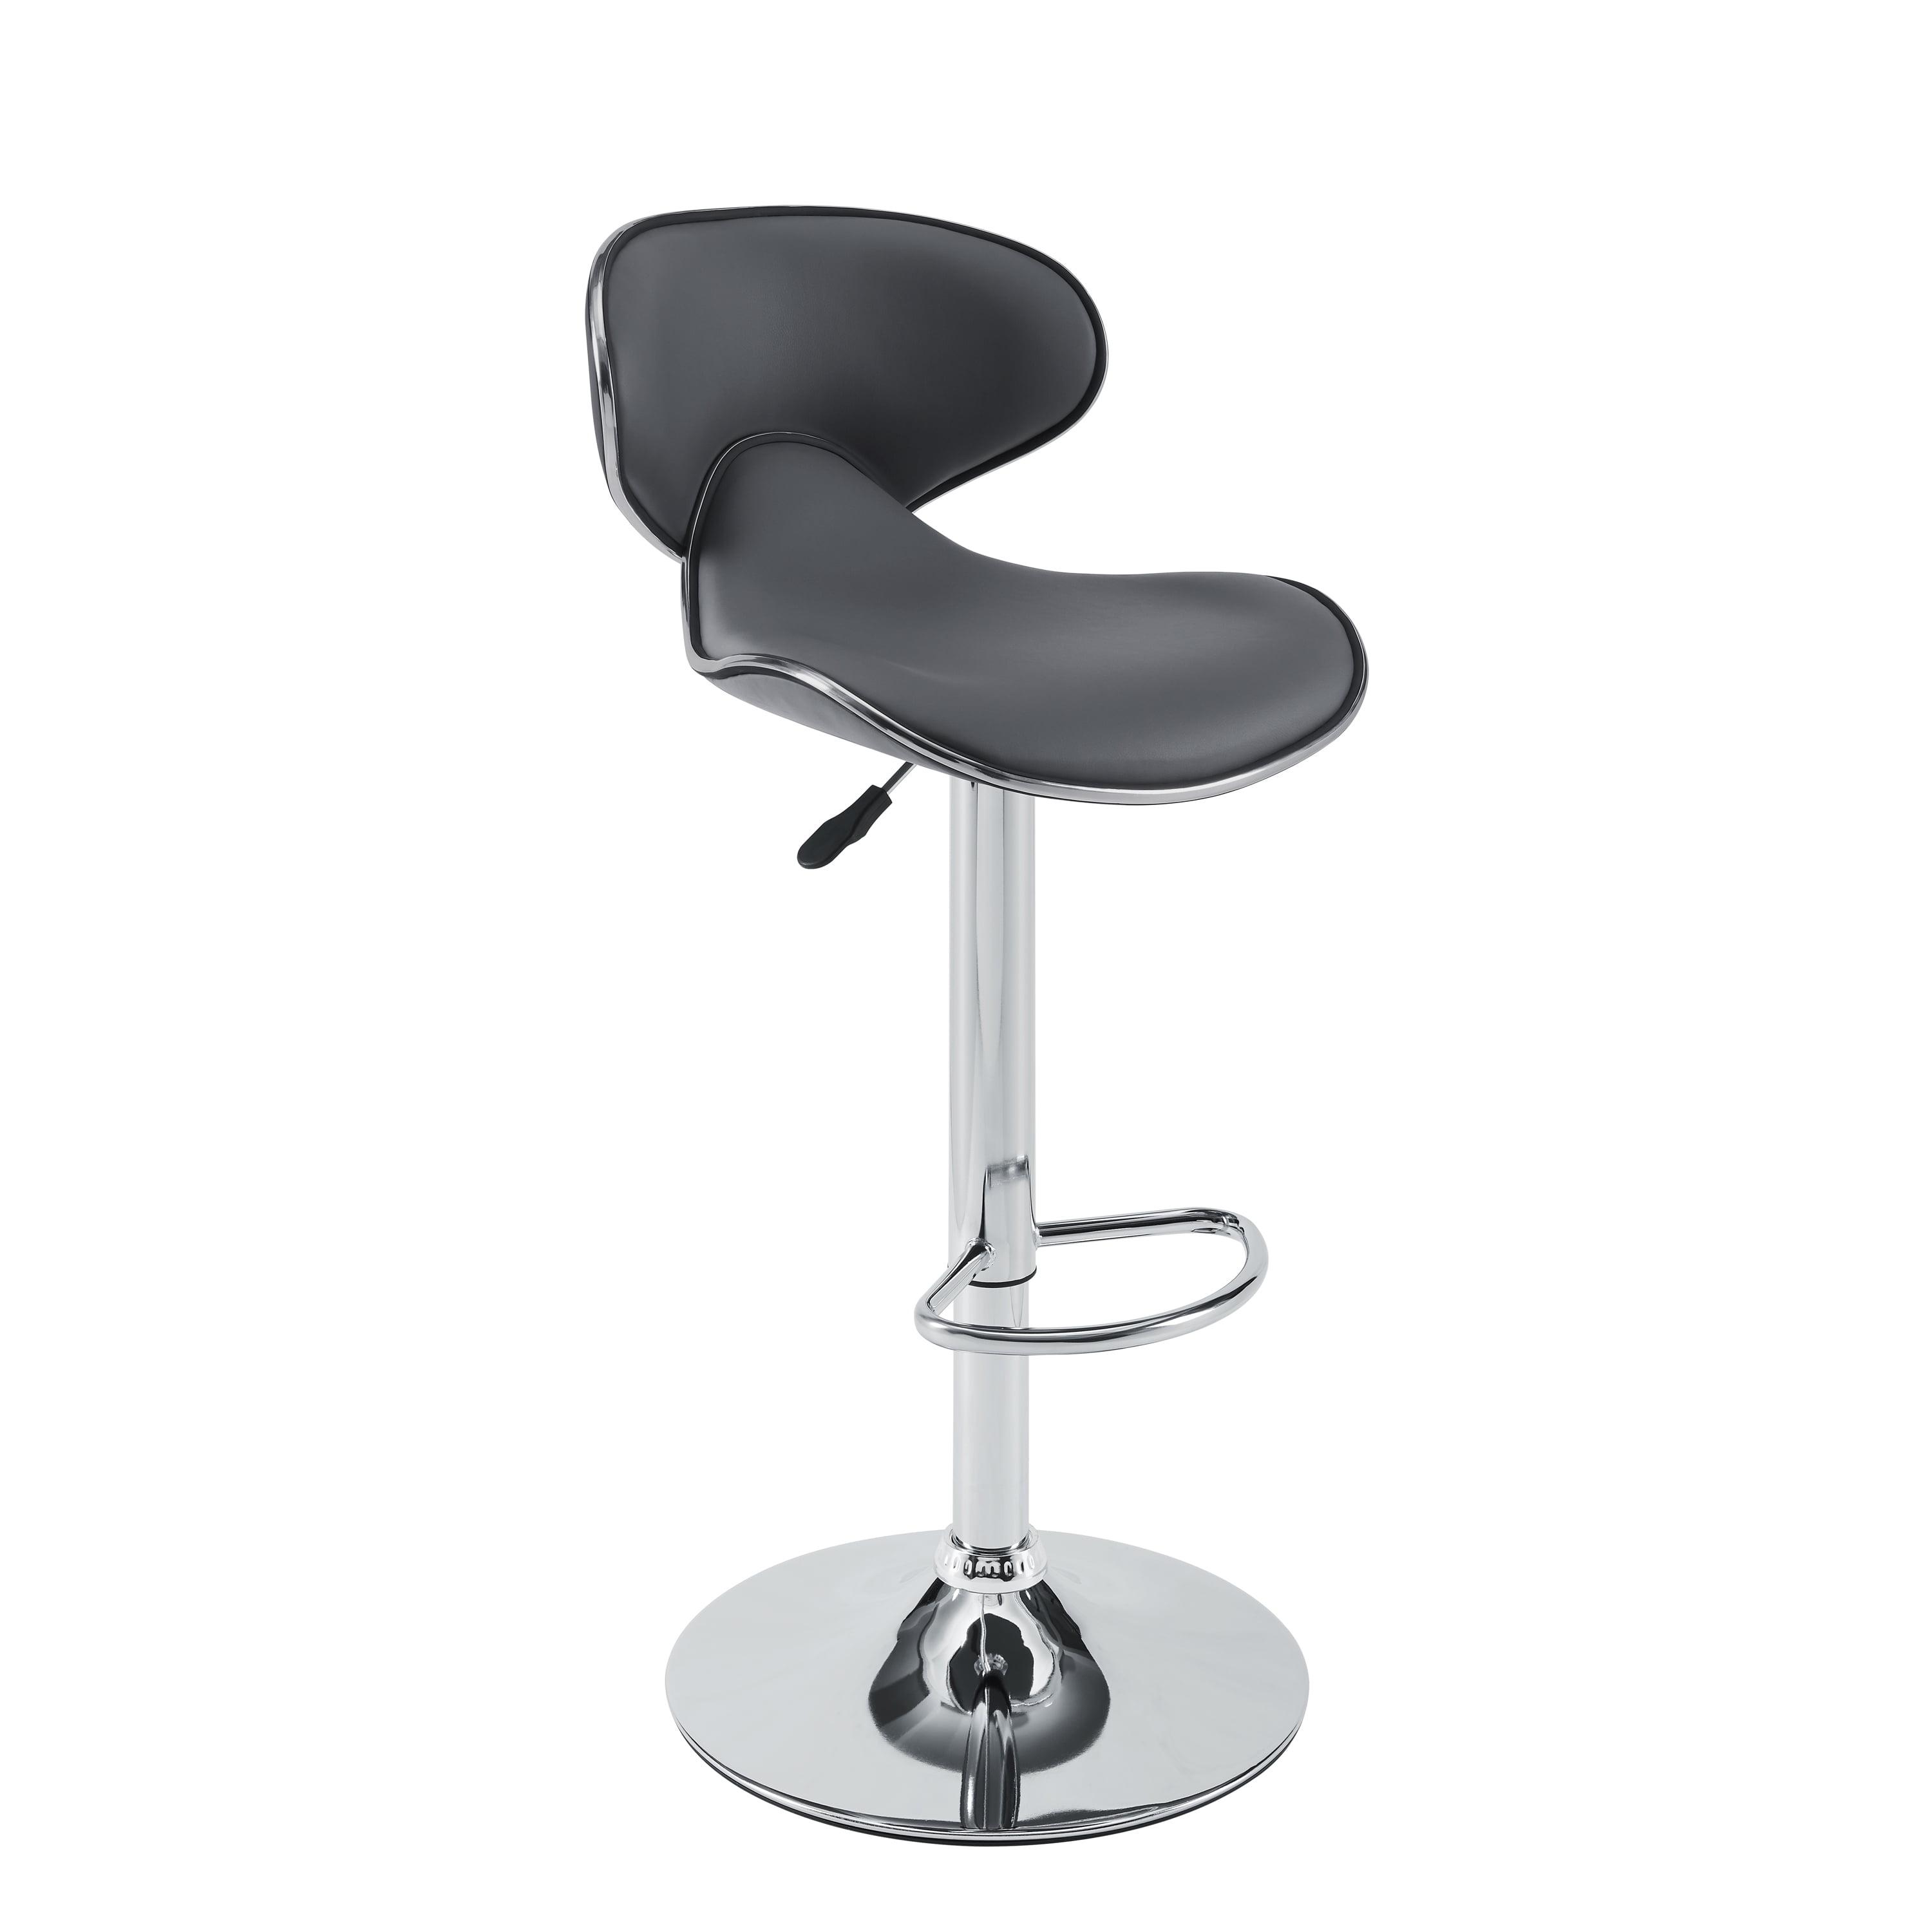 Modern Adjustable Swivel Bar Stool in Gray Faux Leather and Chrome